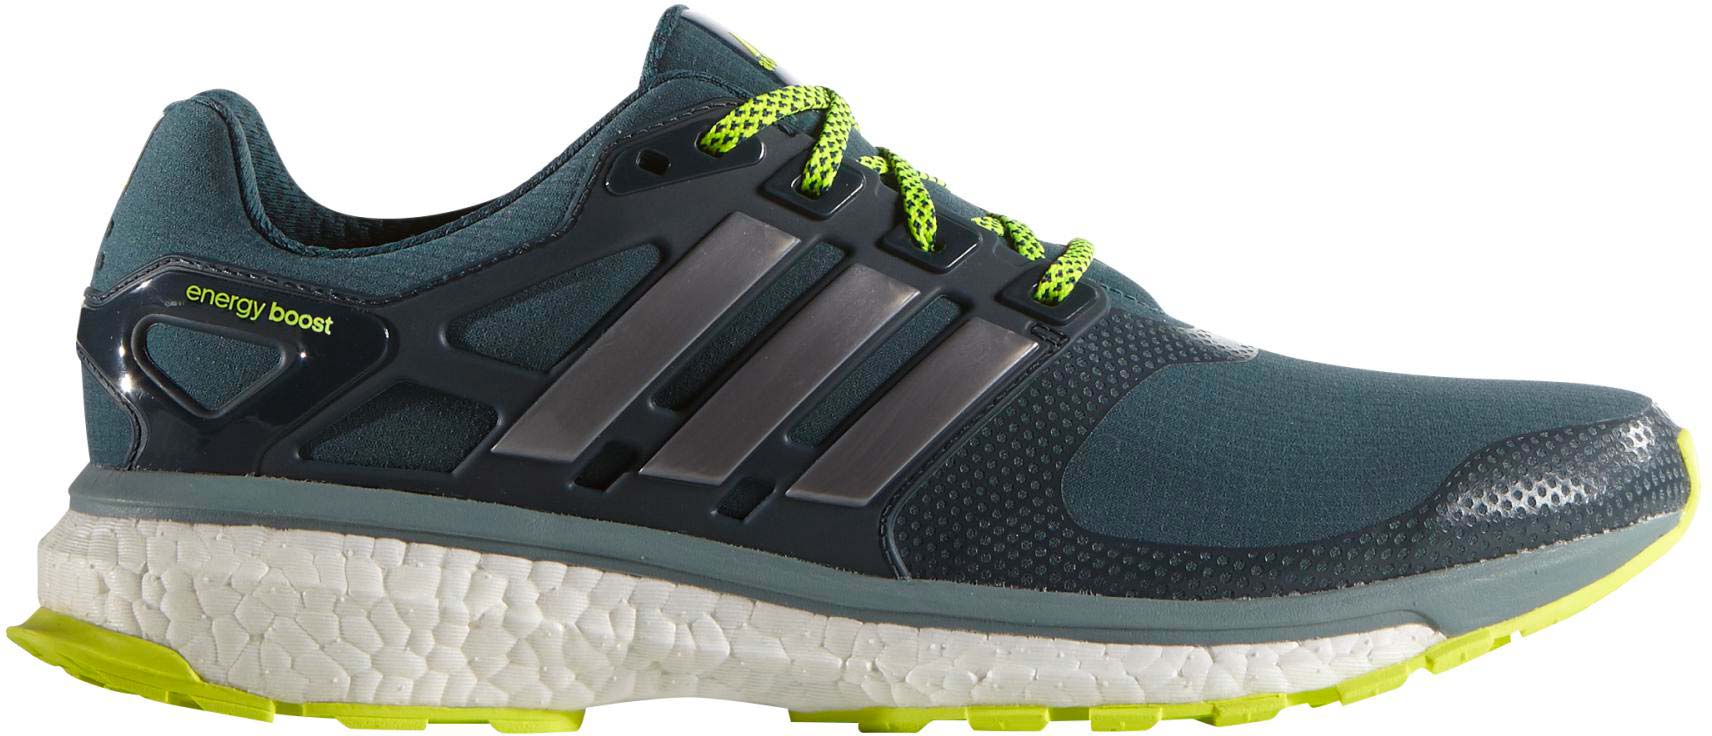 adidas energy boost mens trainers